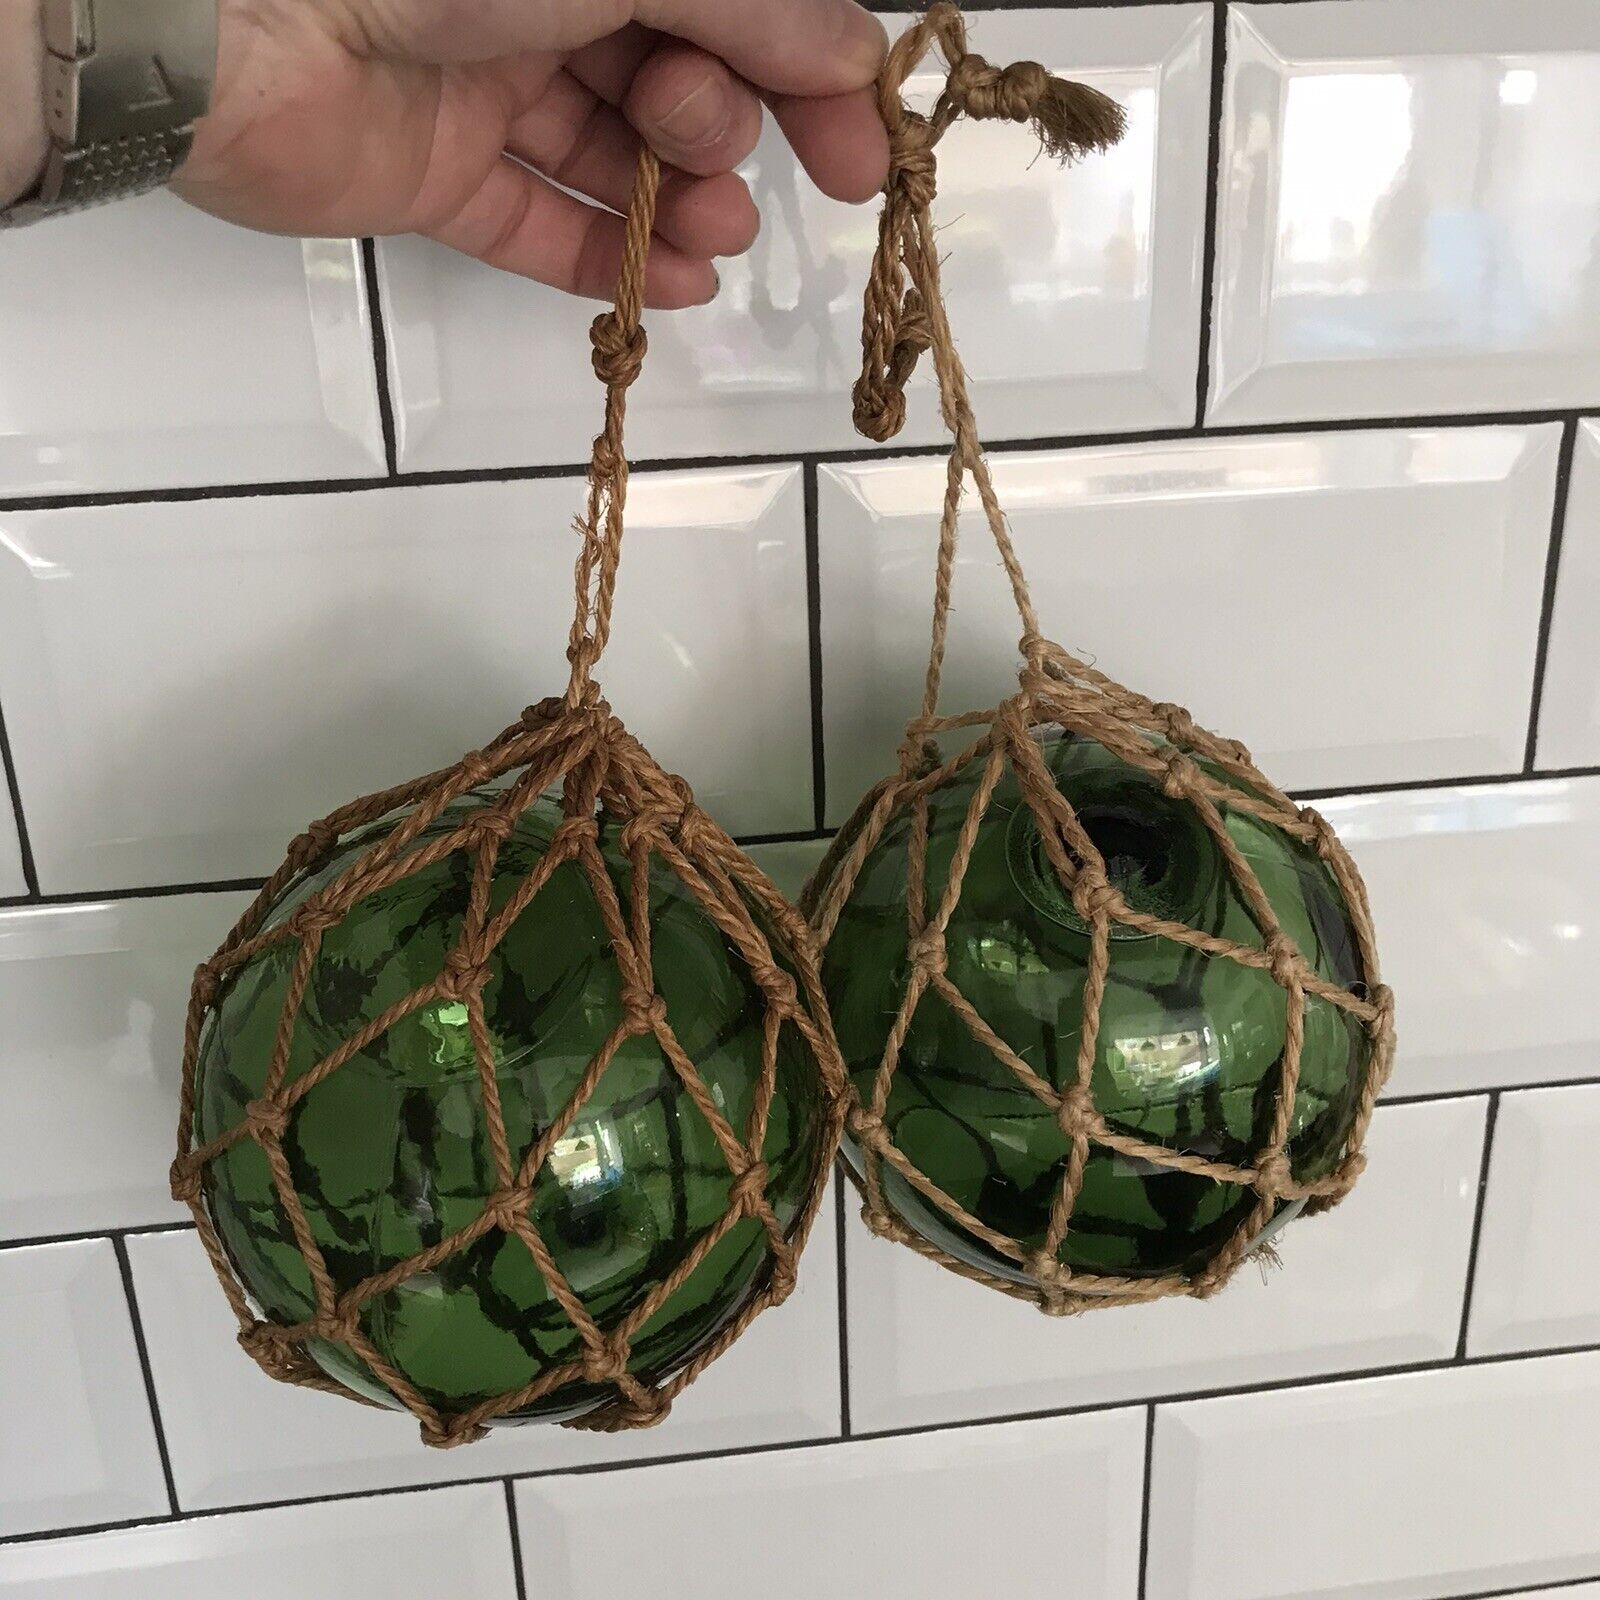 Pair Vintage Fishing Buoy Float Green Glass With Netting Ropes 5”